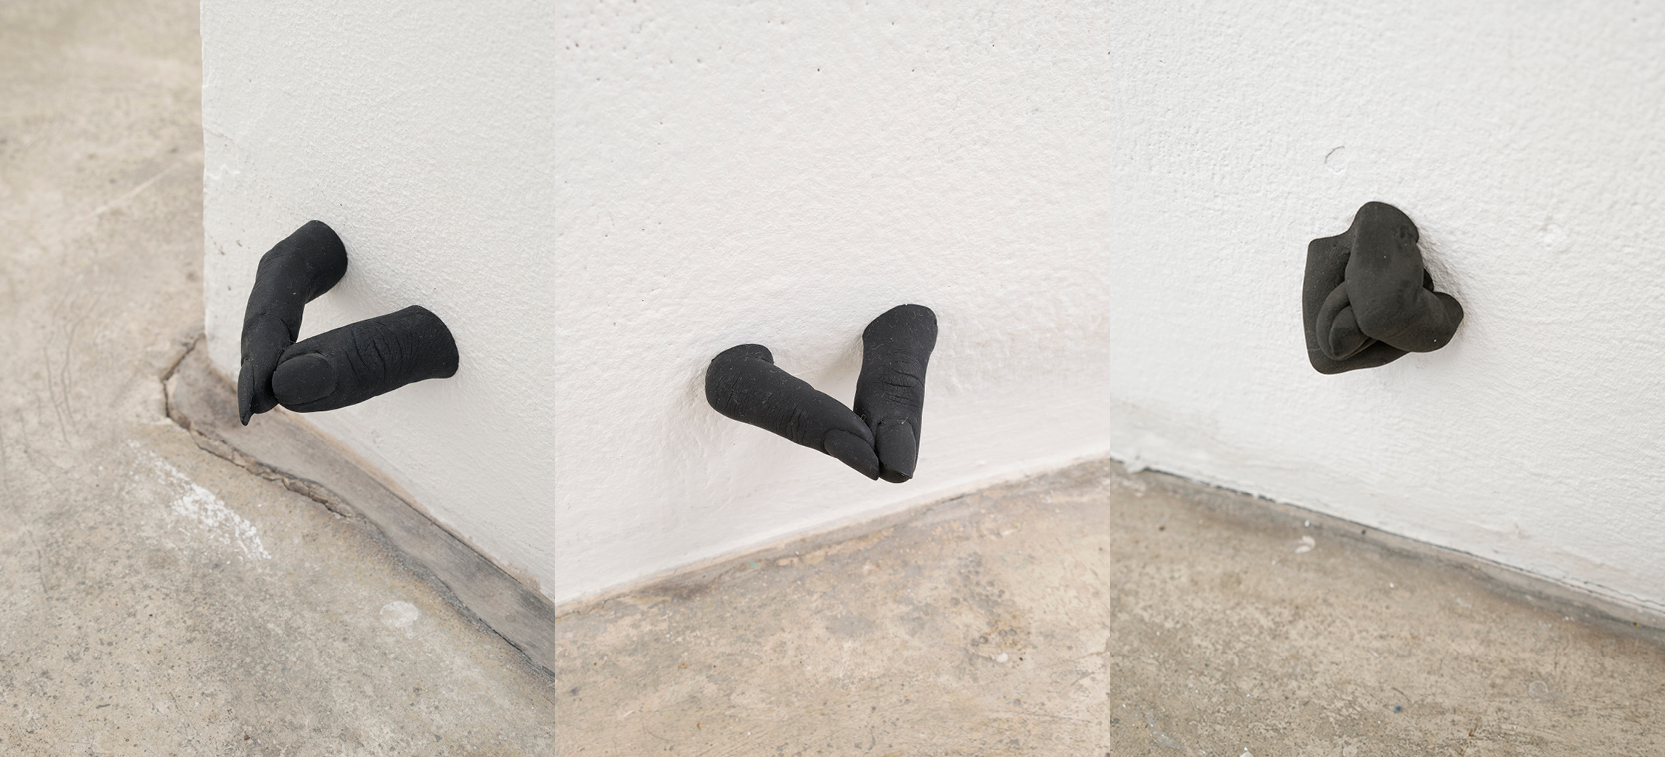 Installation Collage of gotcha by Elektra Stampoulou, 10 pairs of fingers made of plaster, black pigment, each ca. 10x7x2cm, 2023